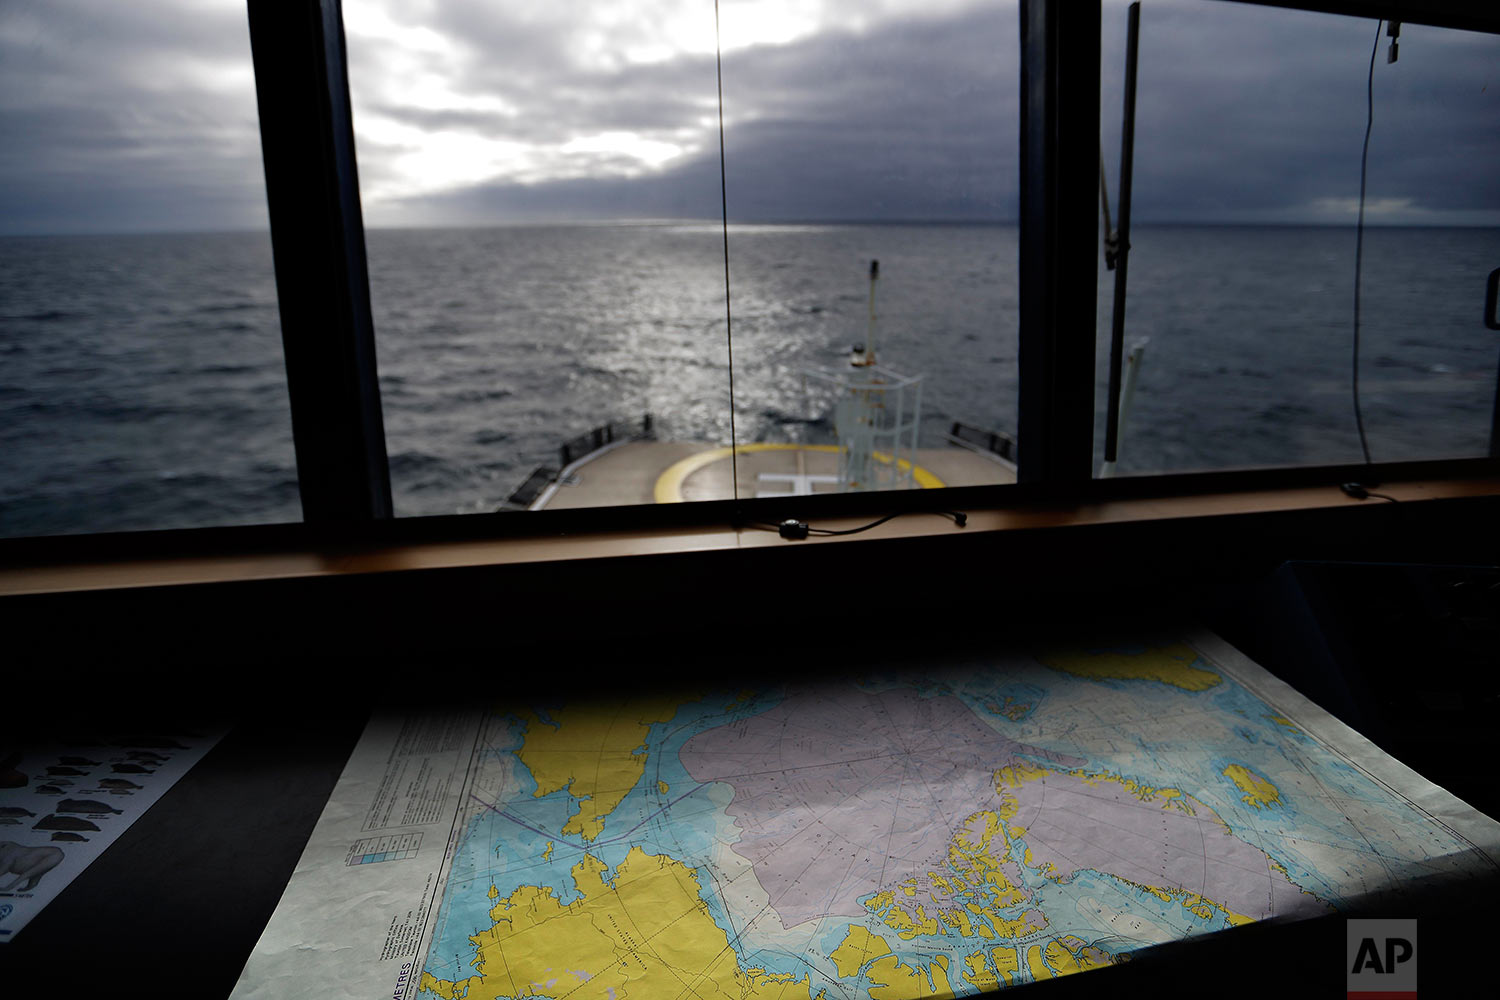  A map of the Arctic Ocean overlooks the bow of the Finnish icebreaker MSV Nordica as it sails in the North Pacific Ocean toward the Bering Sea on Sunday, July 9, 2017. While icebreakers are equipped with sensitive radar systems, ultimately it's up t